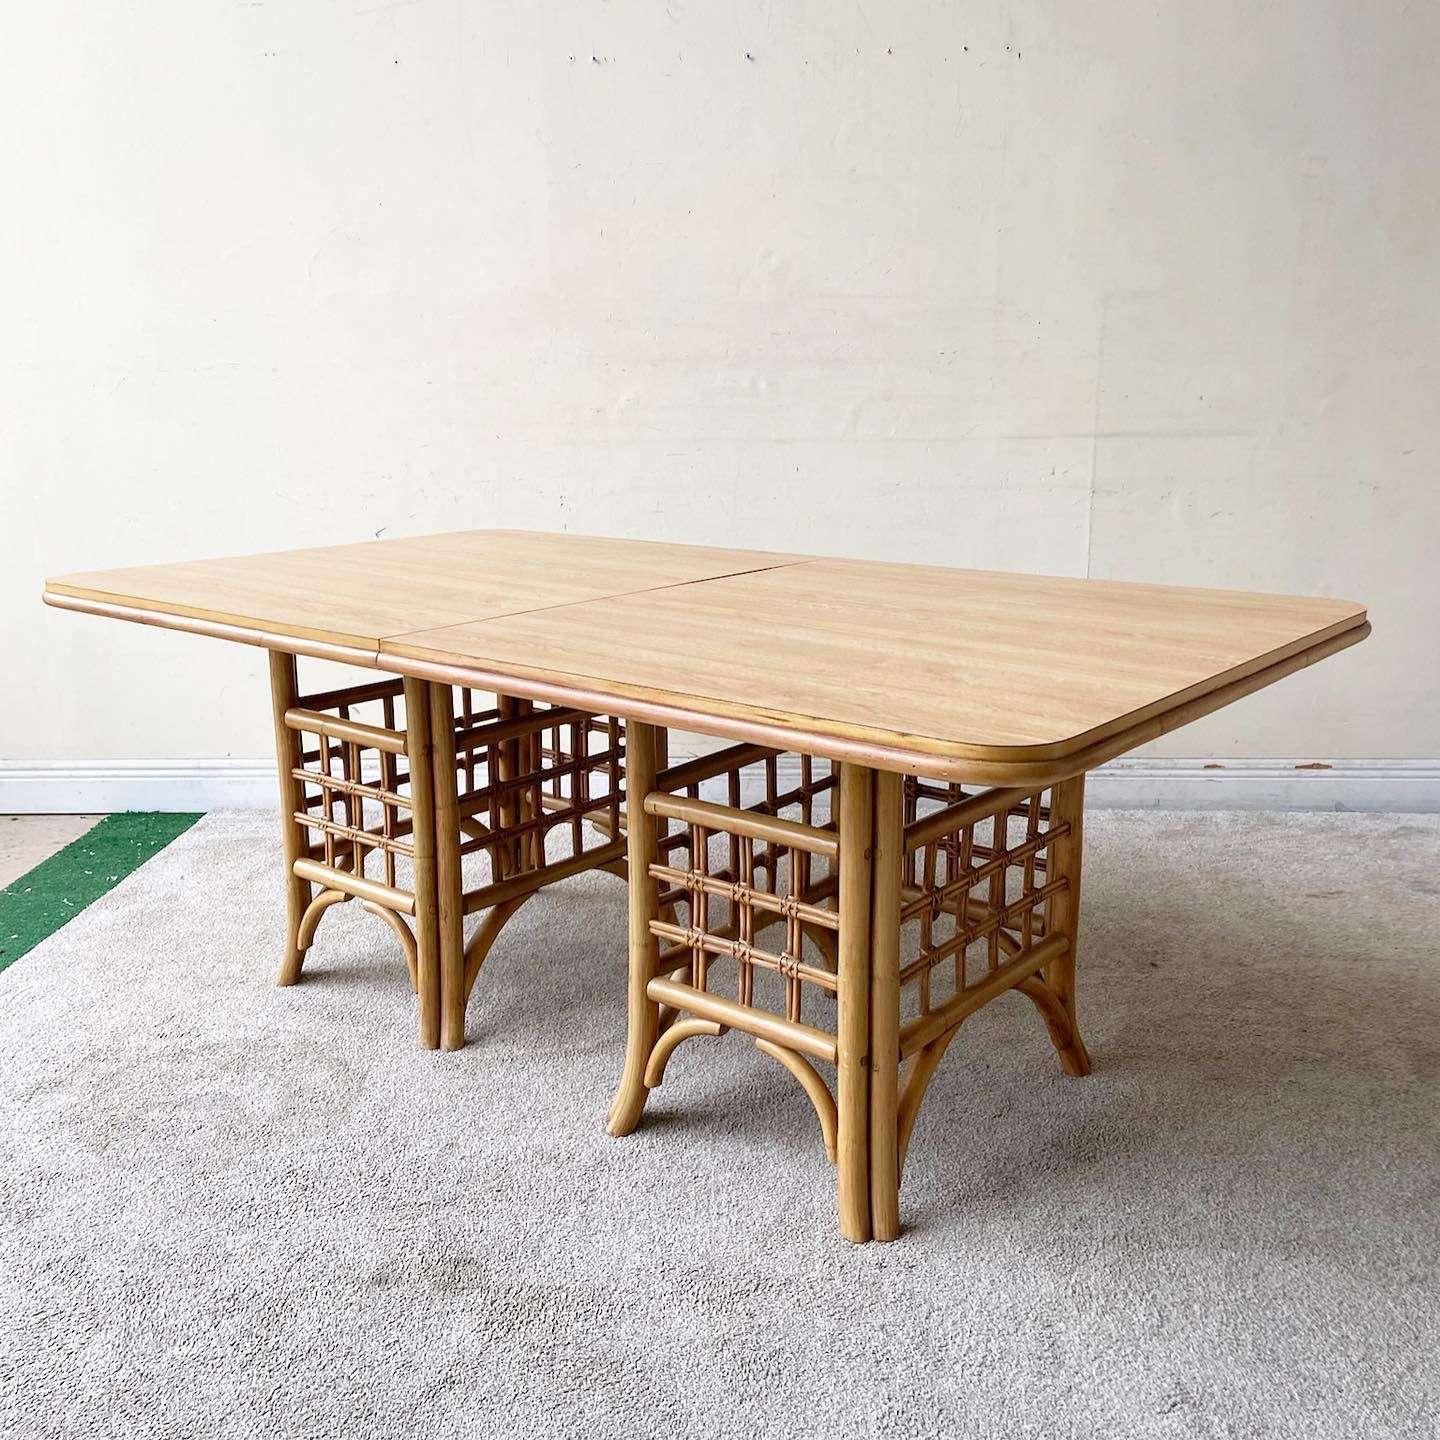 Exceptional vintage boho chic dining table. Features two bamboo rattan pedestals bases with a Woodgrain laminate top.